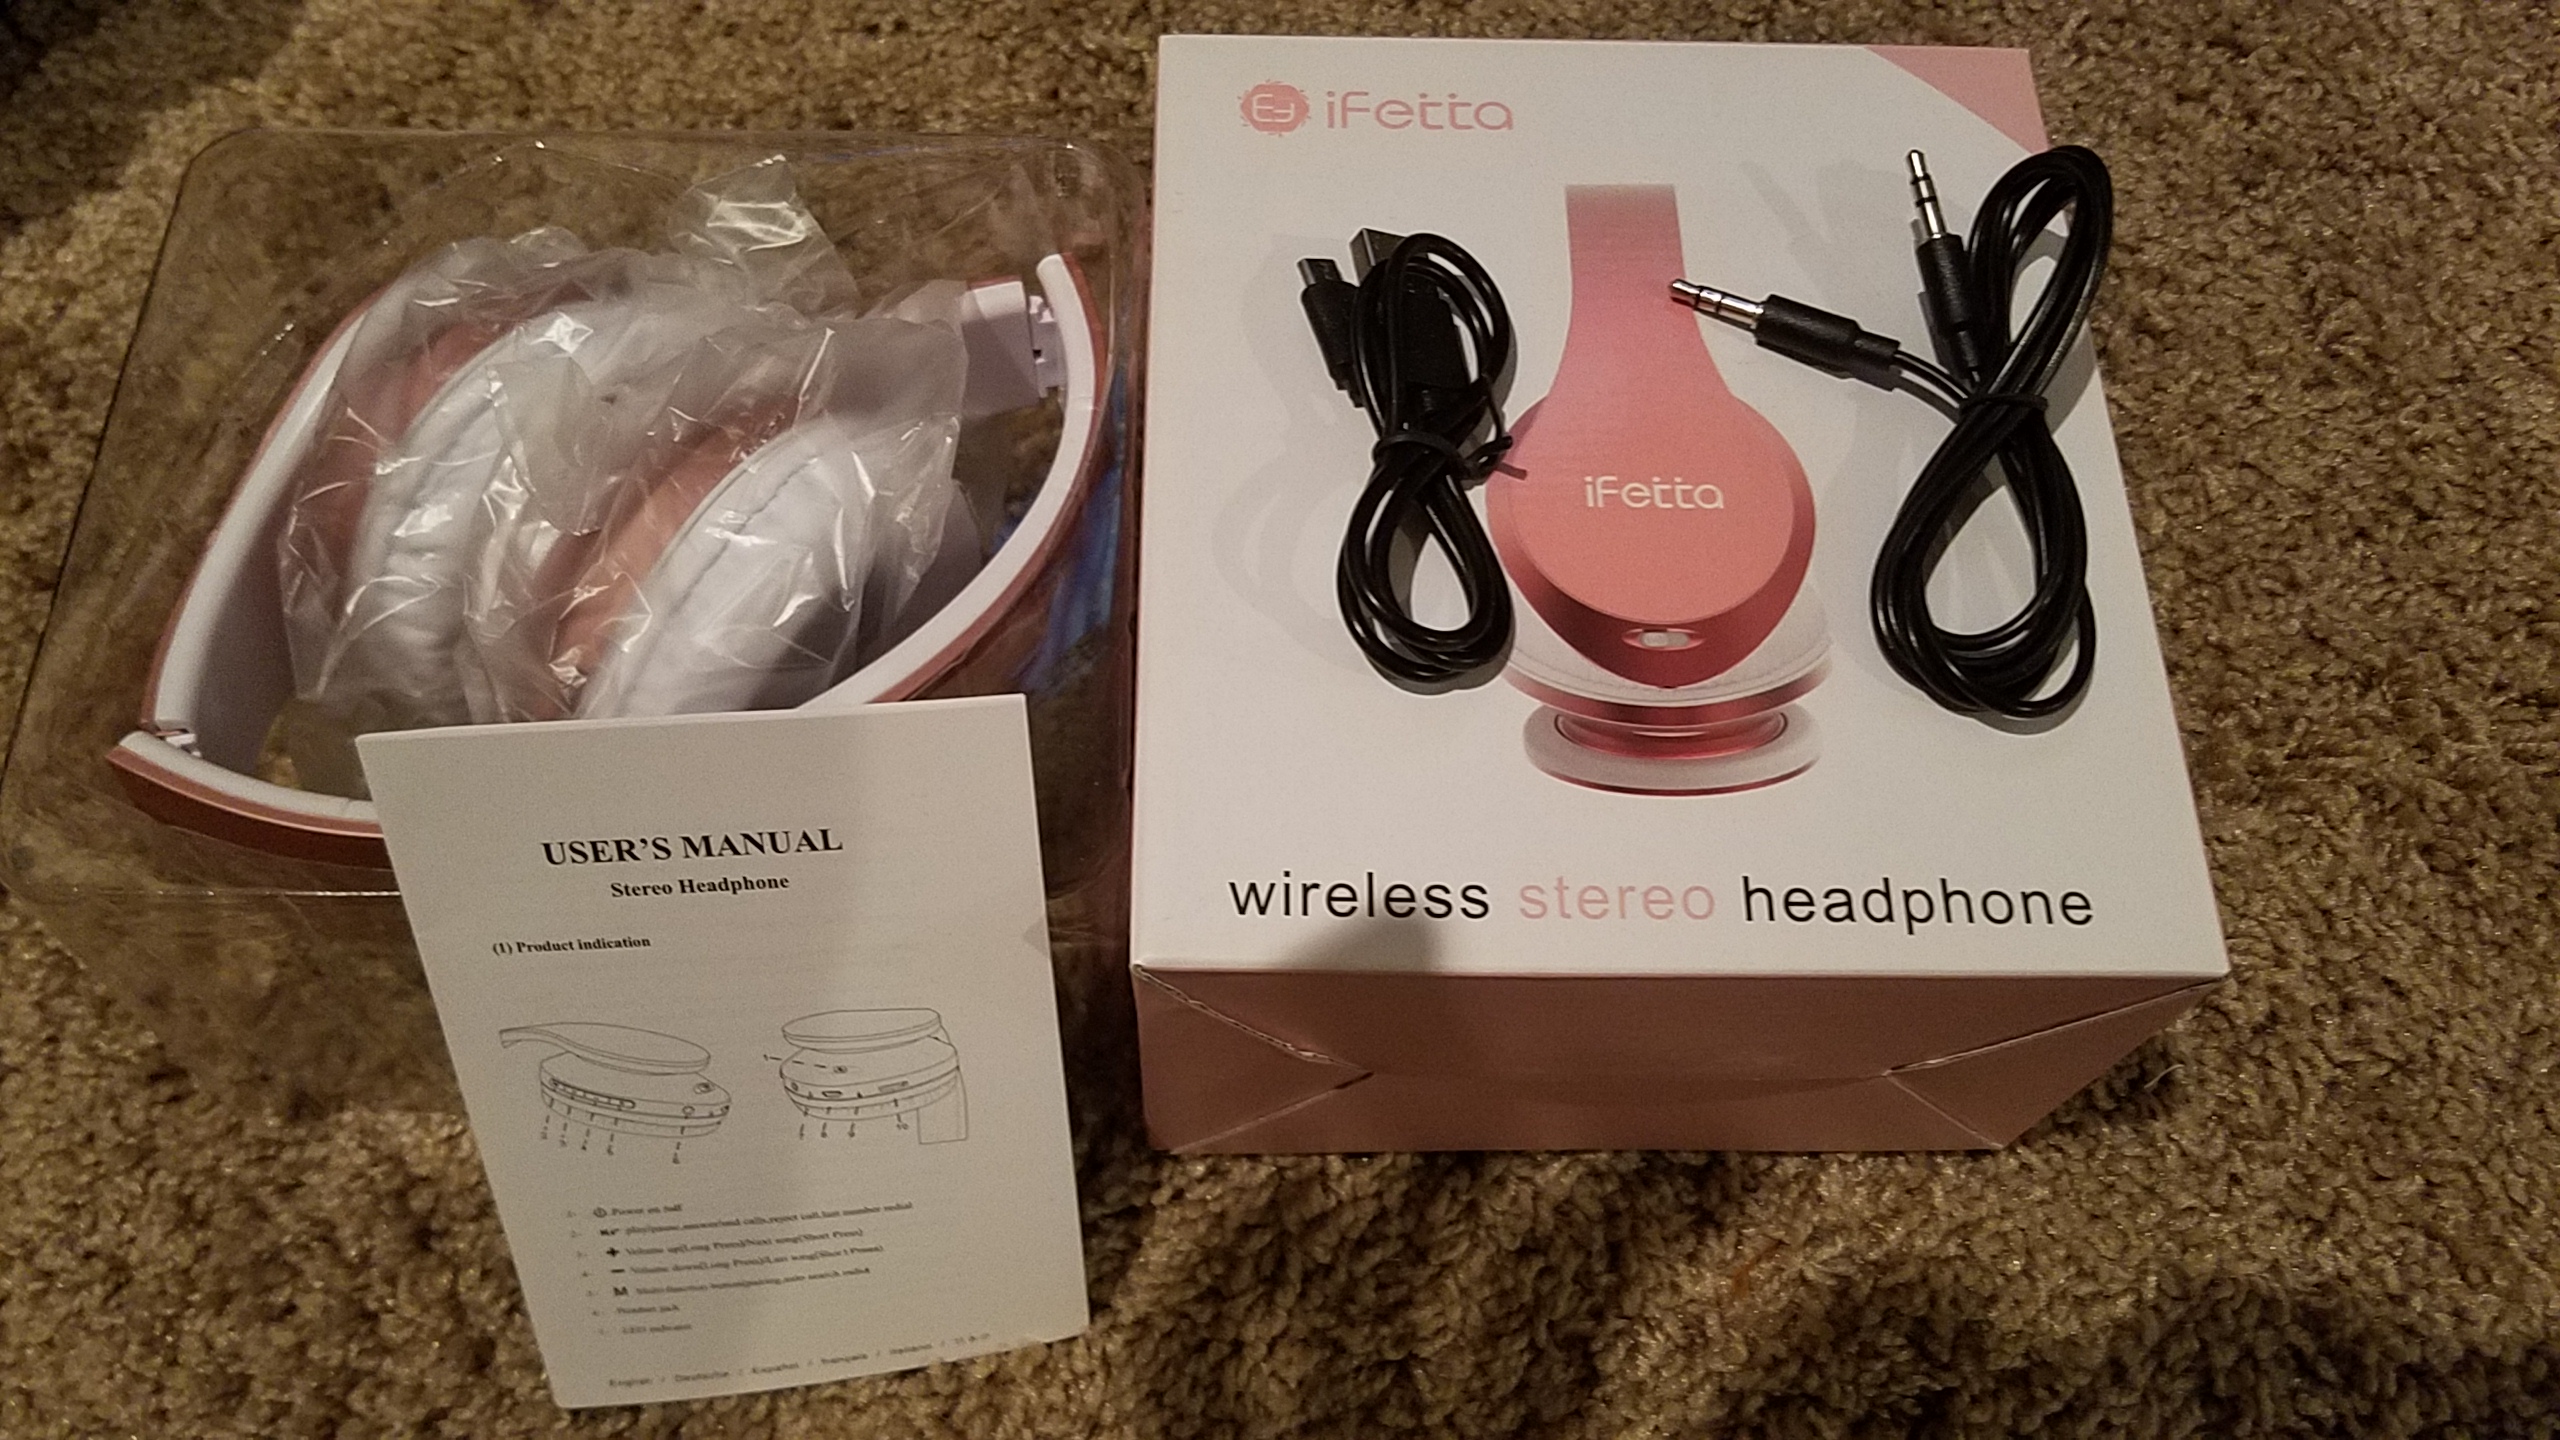 This headsets are such a great value that I ended up buying a couple more!